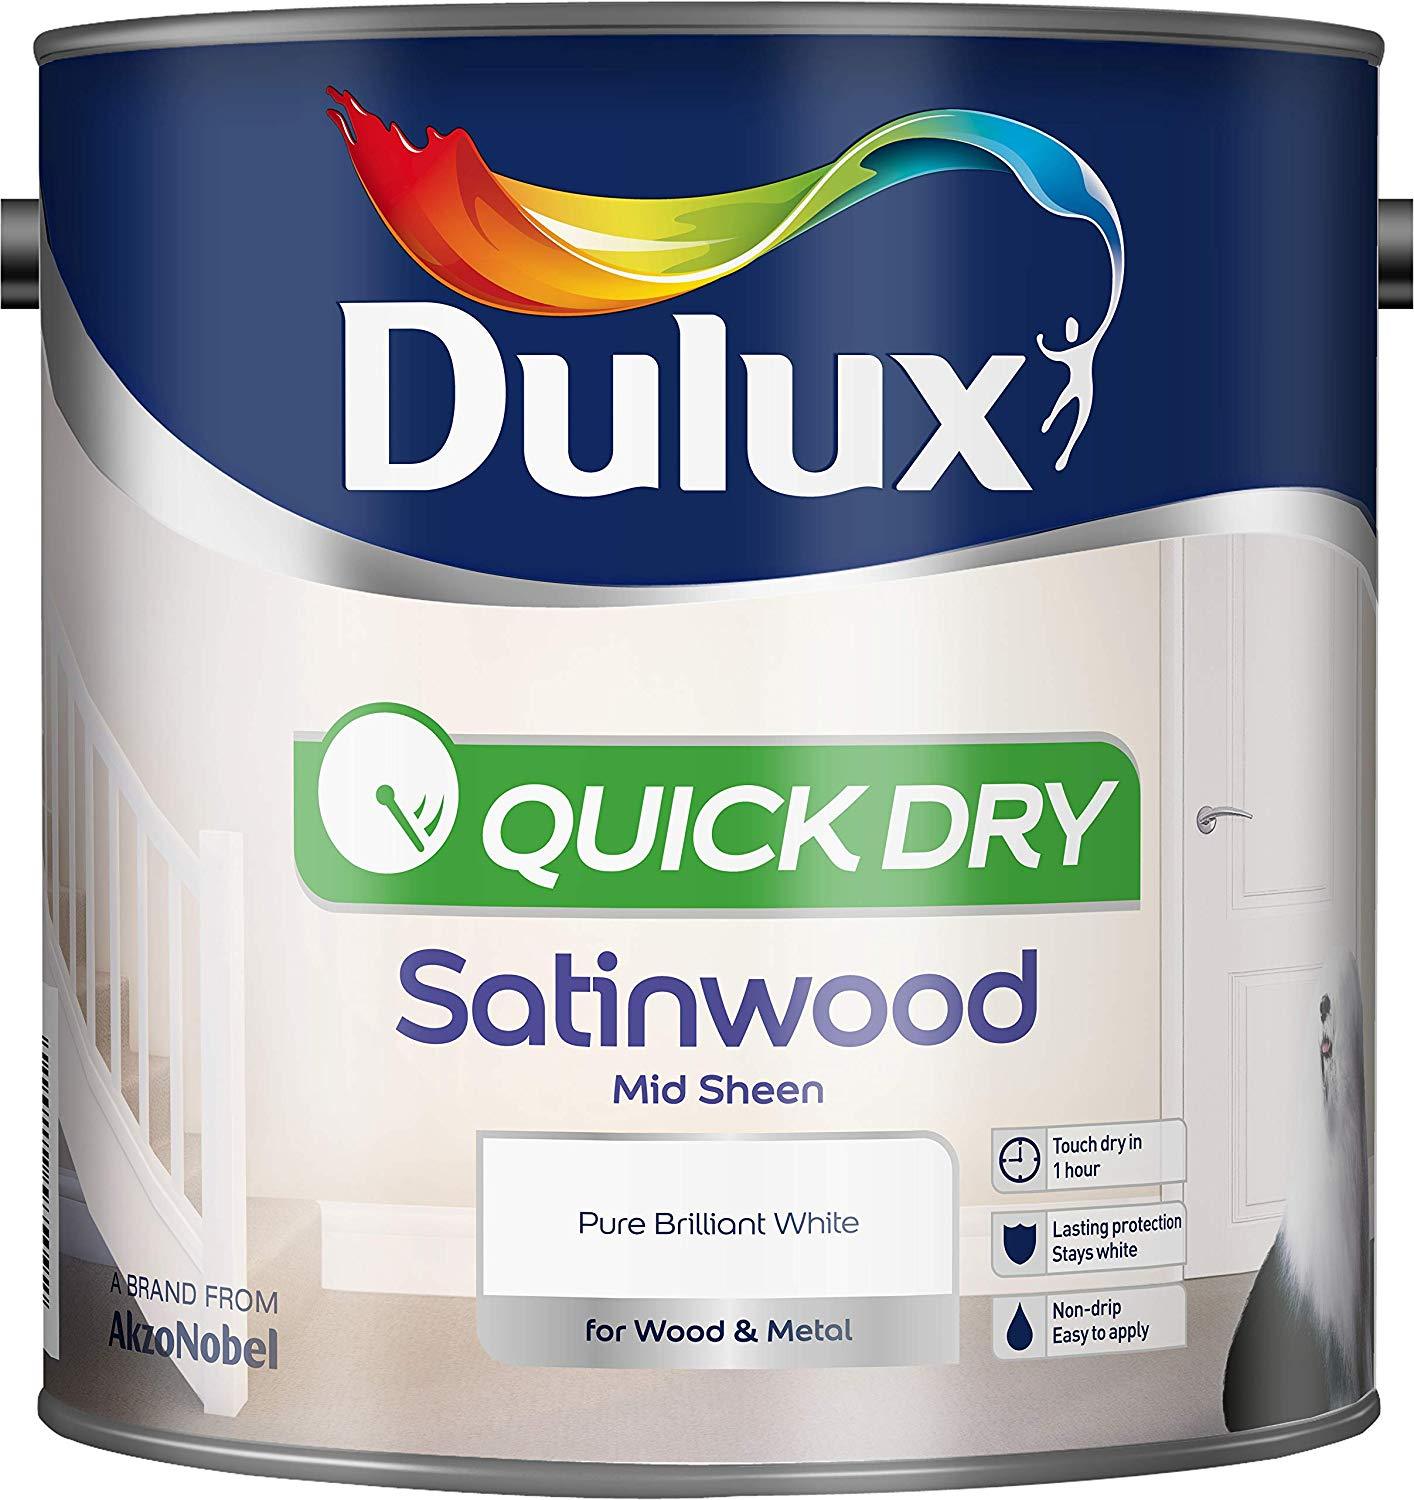 Dulux-Quick-Dry-Satinwood-Paint-For-Wood-And-Metal-Pure-Brilliant-White-2.5L